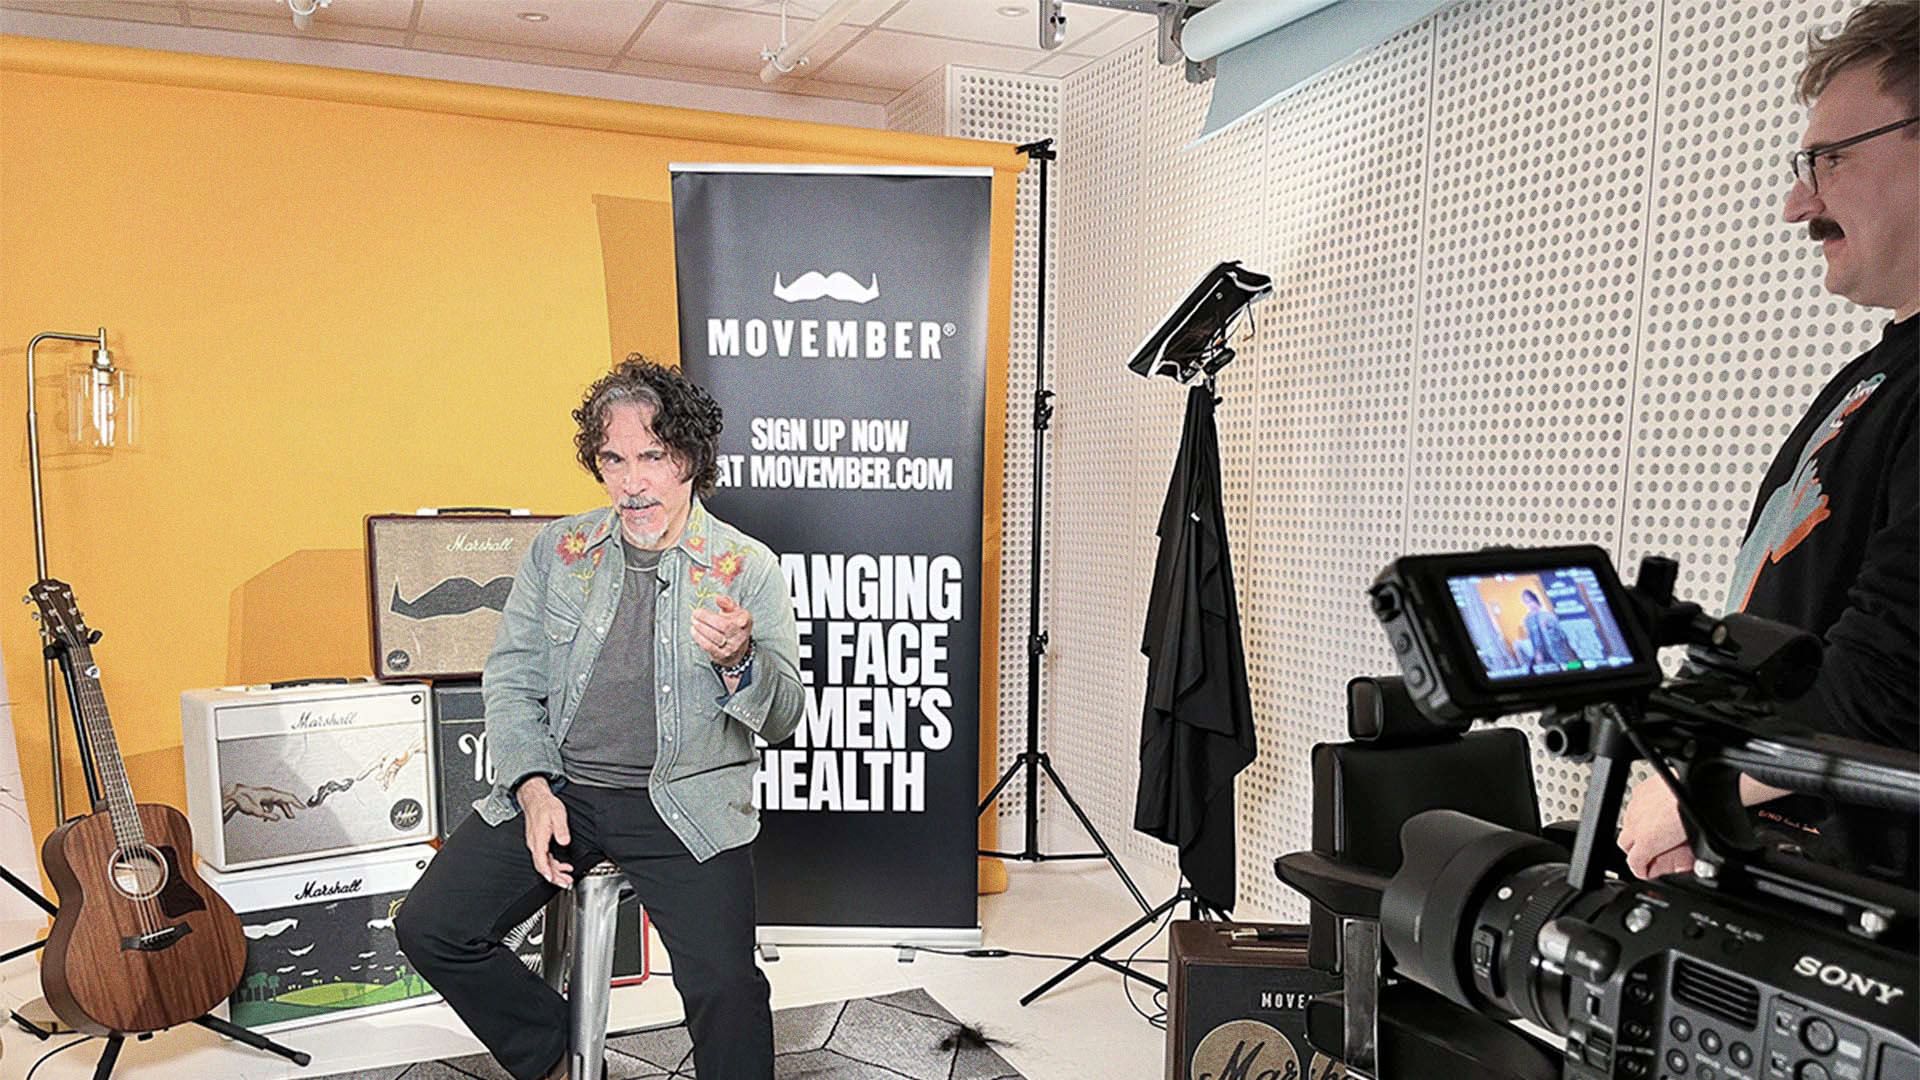 Photo of John Oates from Hall & Oates, recording video in a studio with a Movember staff member.